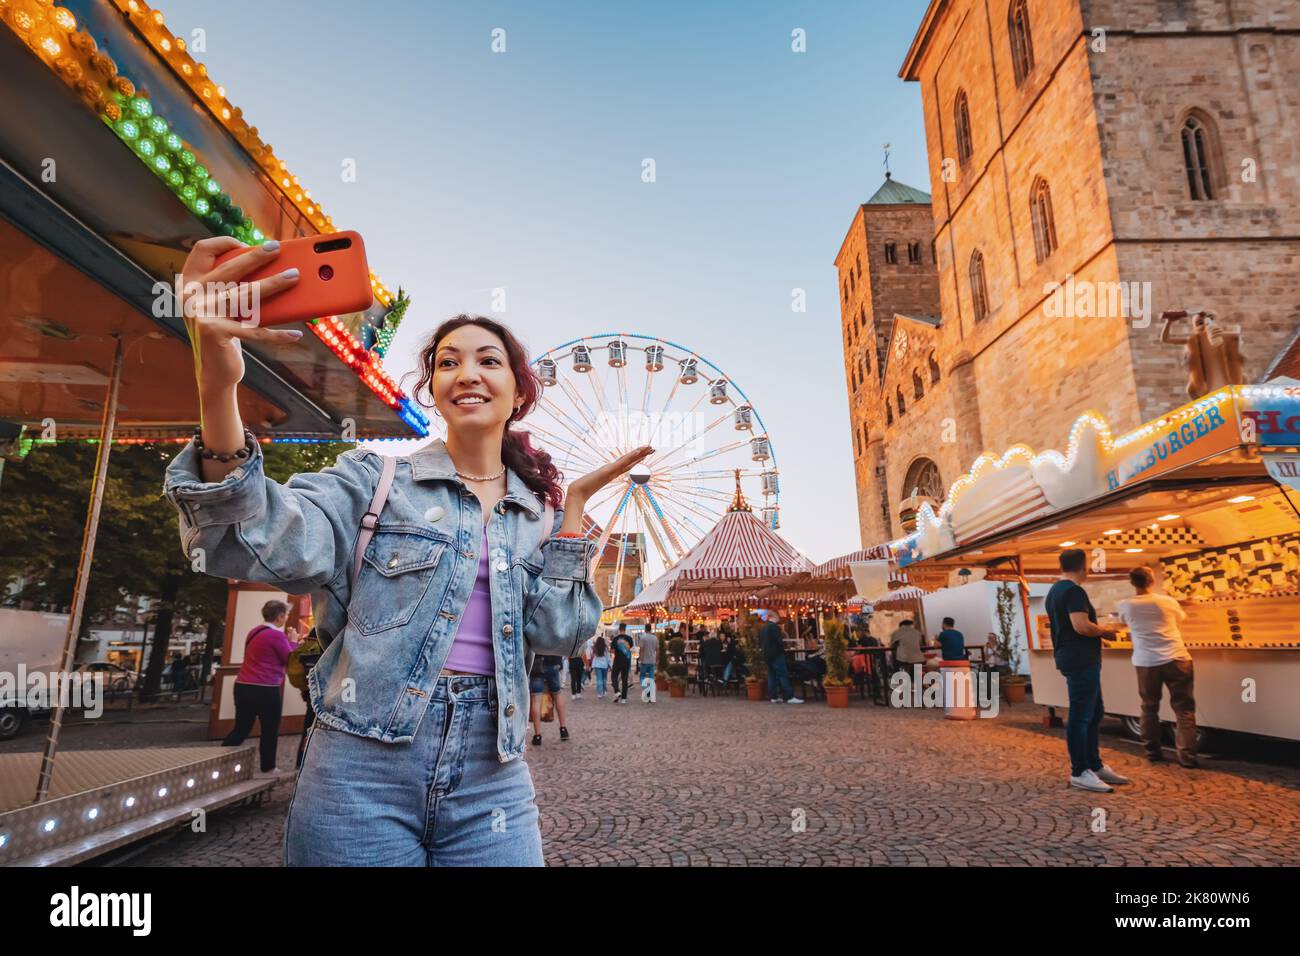 A traveler girl takes a selfie photo for social networks at an amusement fair with a Ferris wheel in the old European city on the square Stock Photo